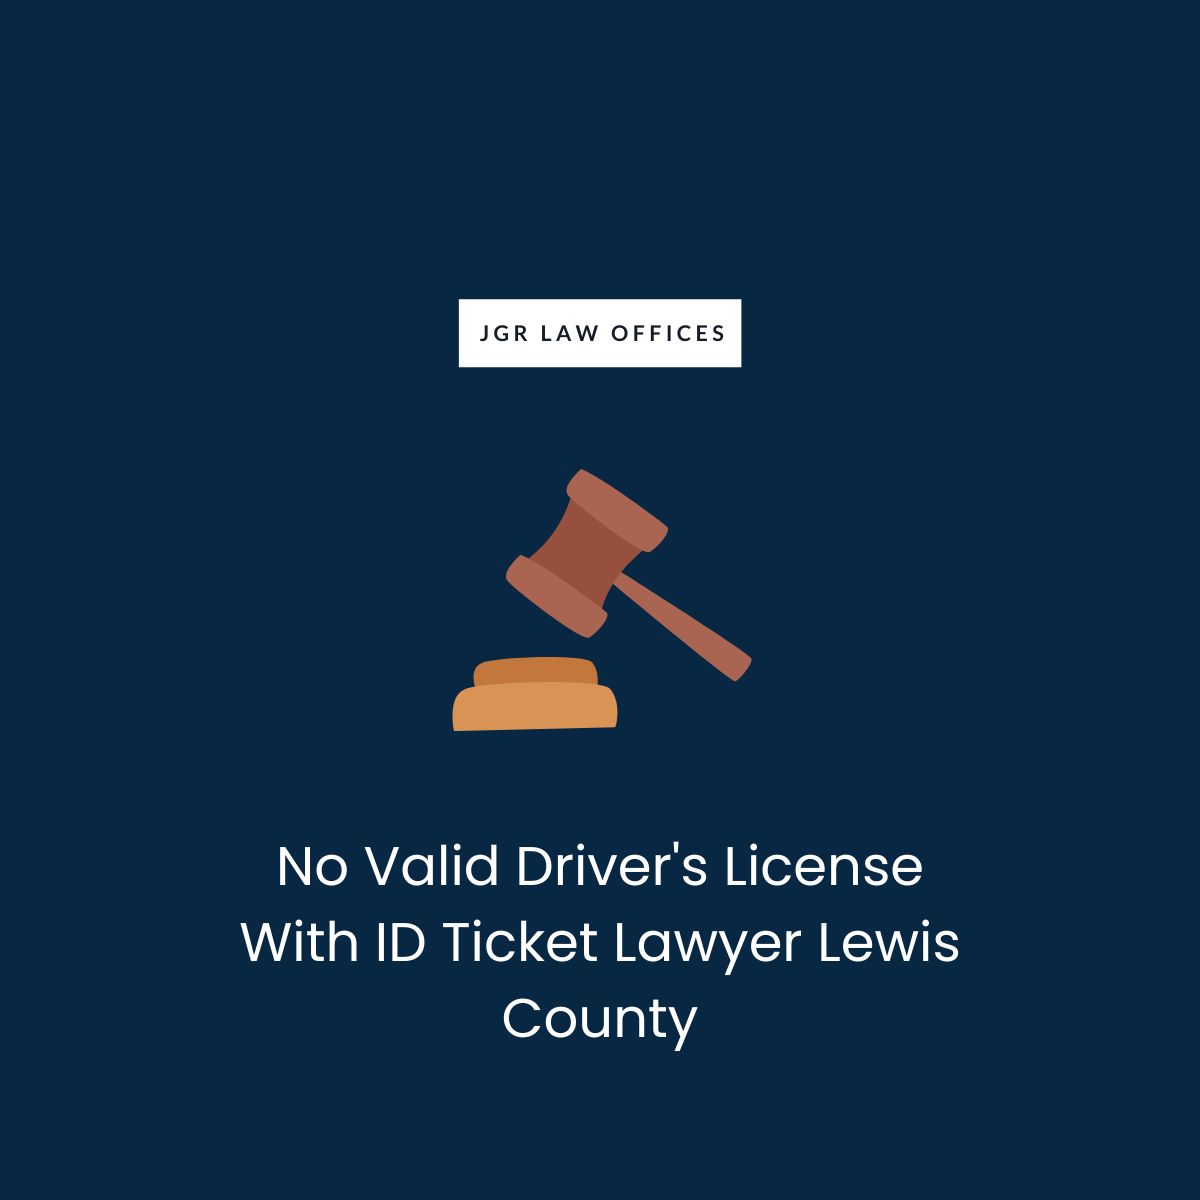 No Valid Driver's License With ID Ticket Attorney Lewis County